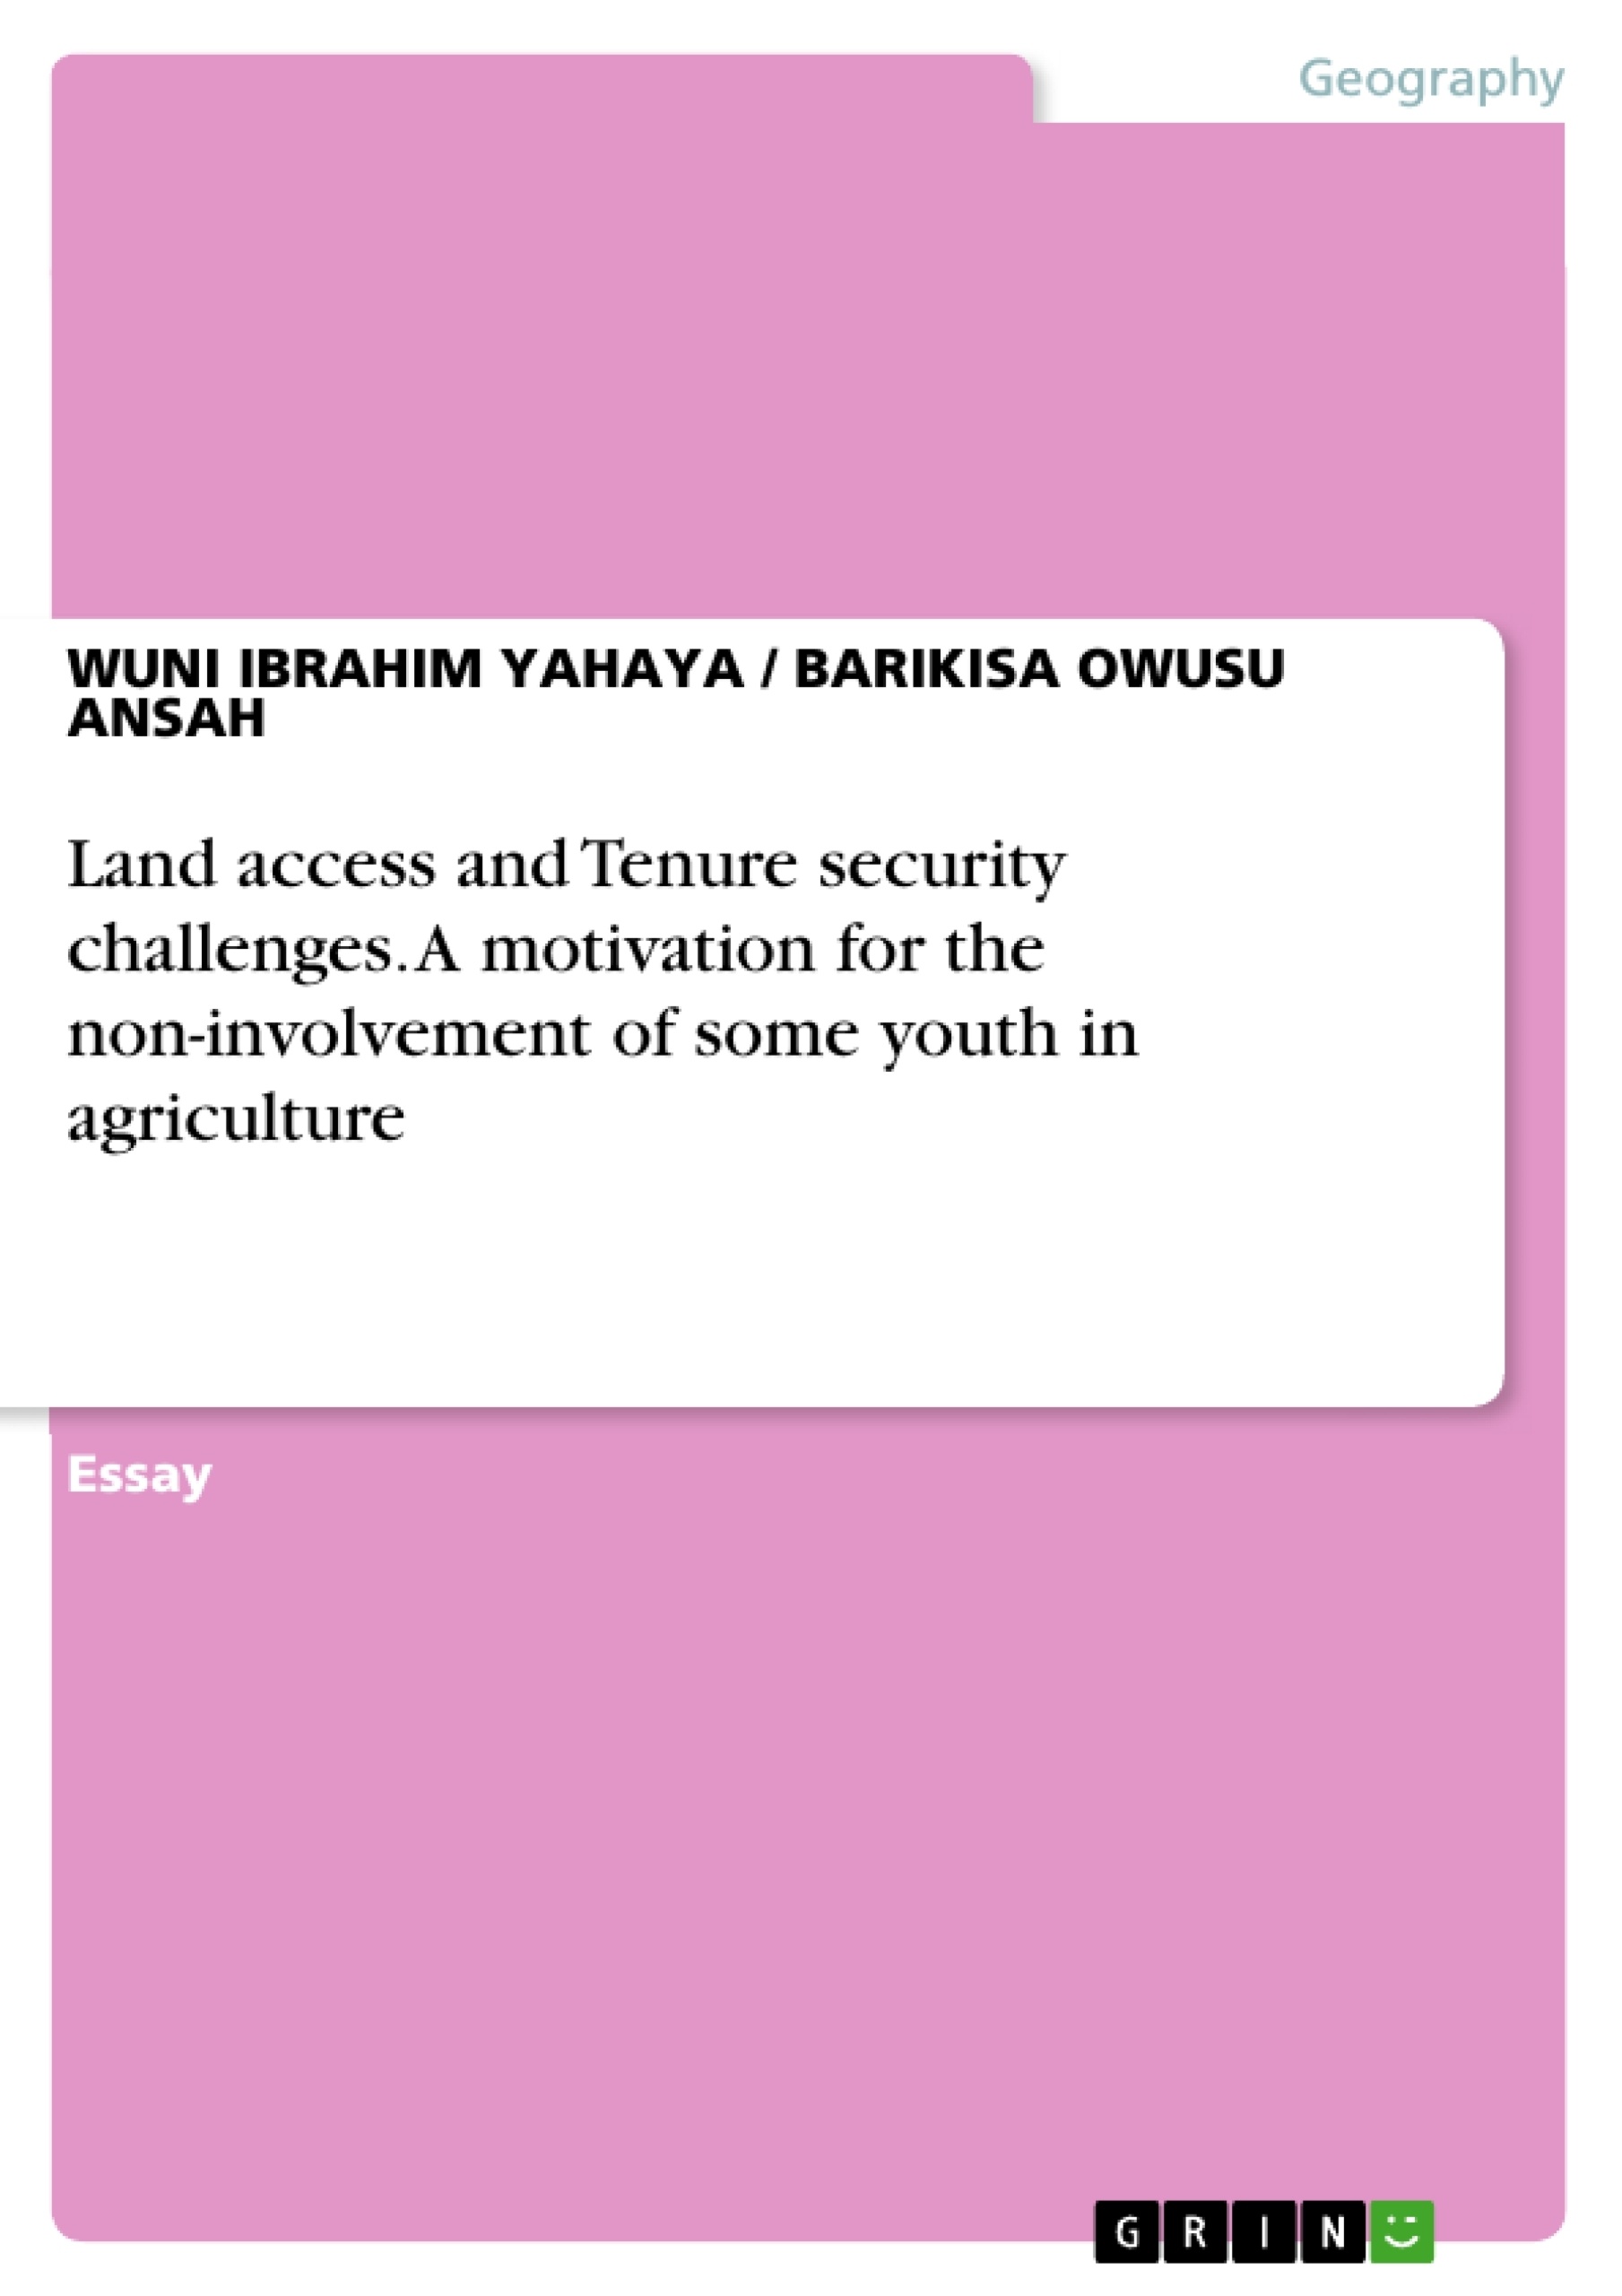 Titre: Land access and Tenure security challenges. A motivation for the non-involvement of some youth in agriculture